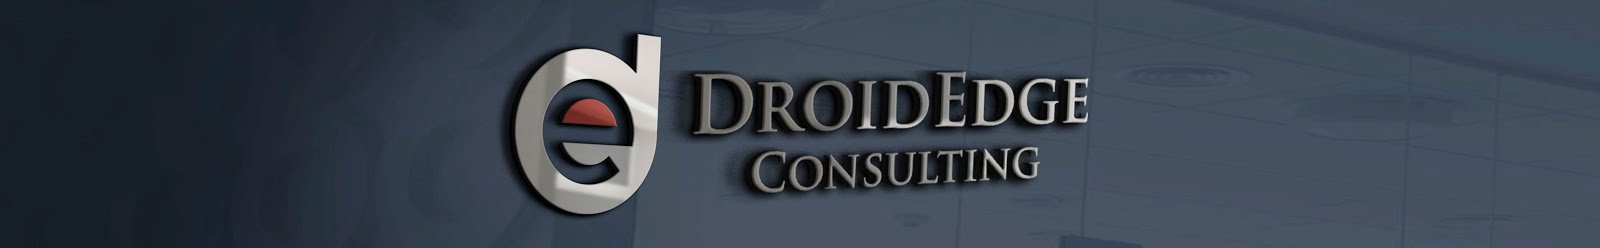 DroidEdge Consulting Blog